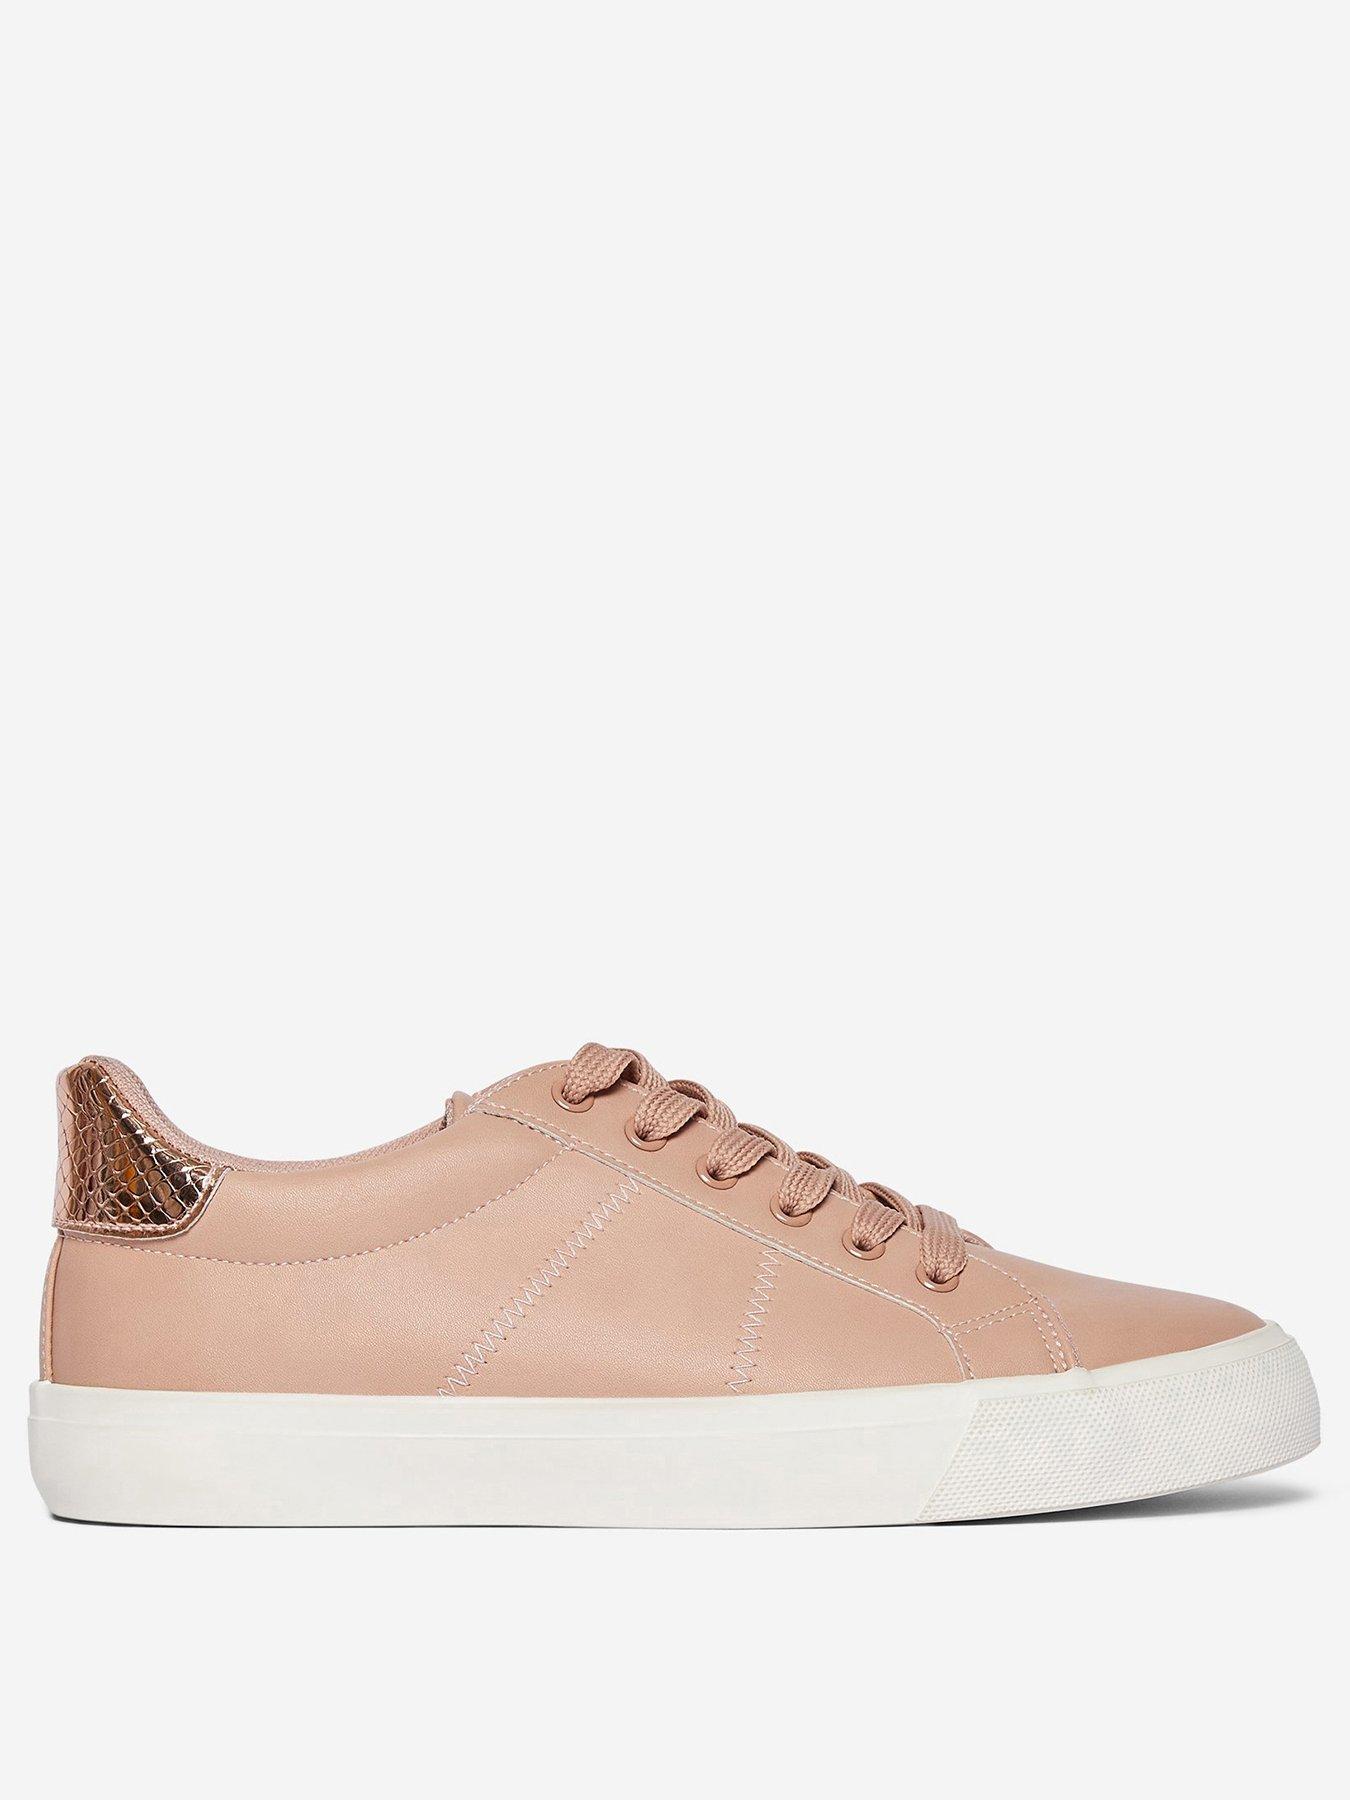 Dorothy perkins | Womens sports shoes 